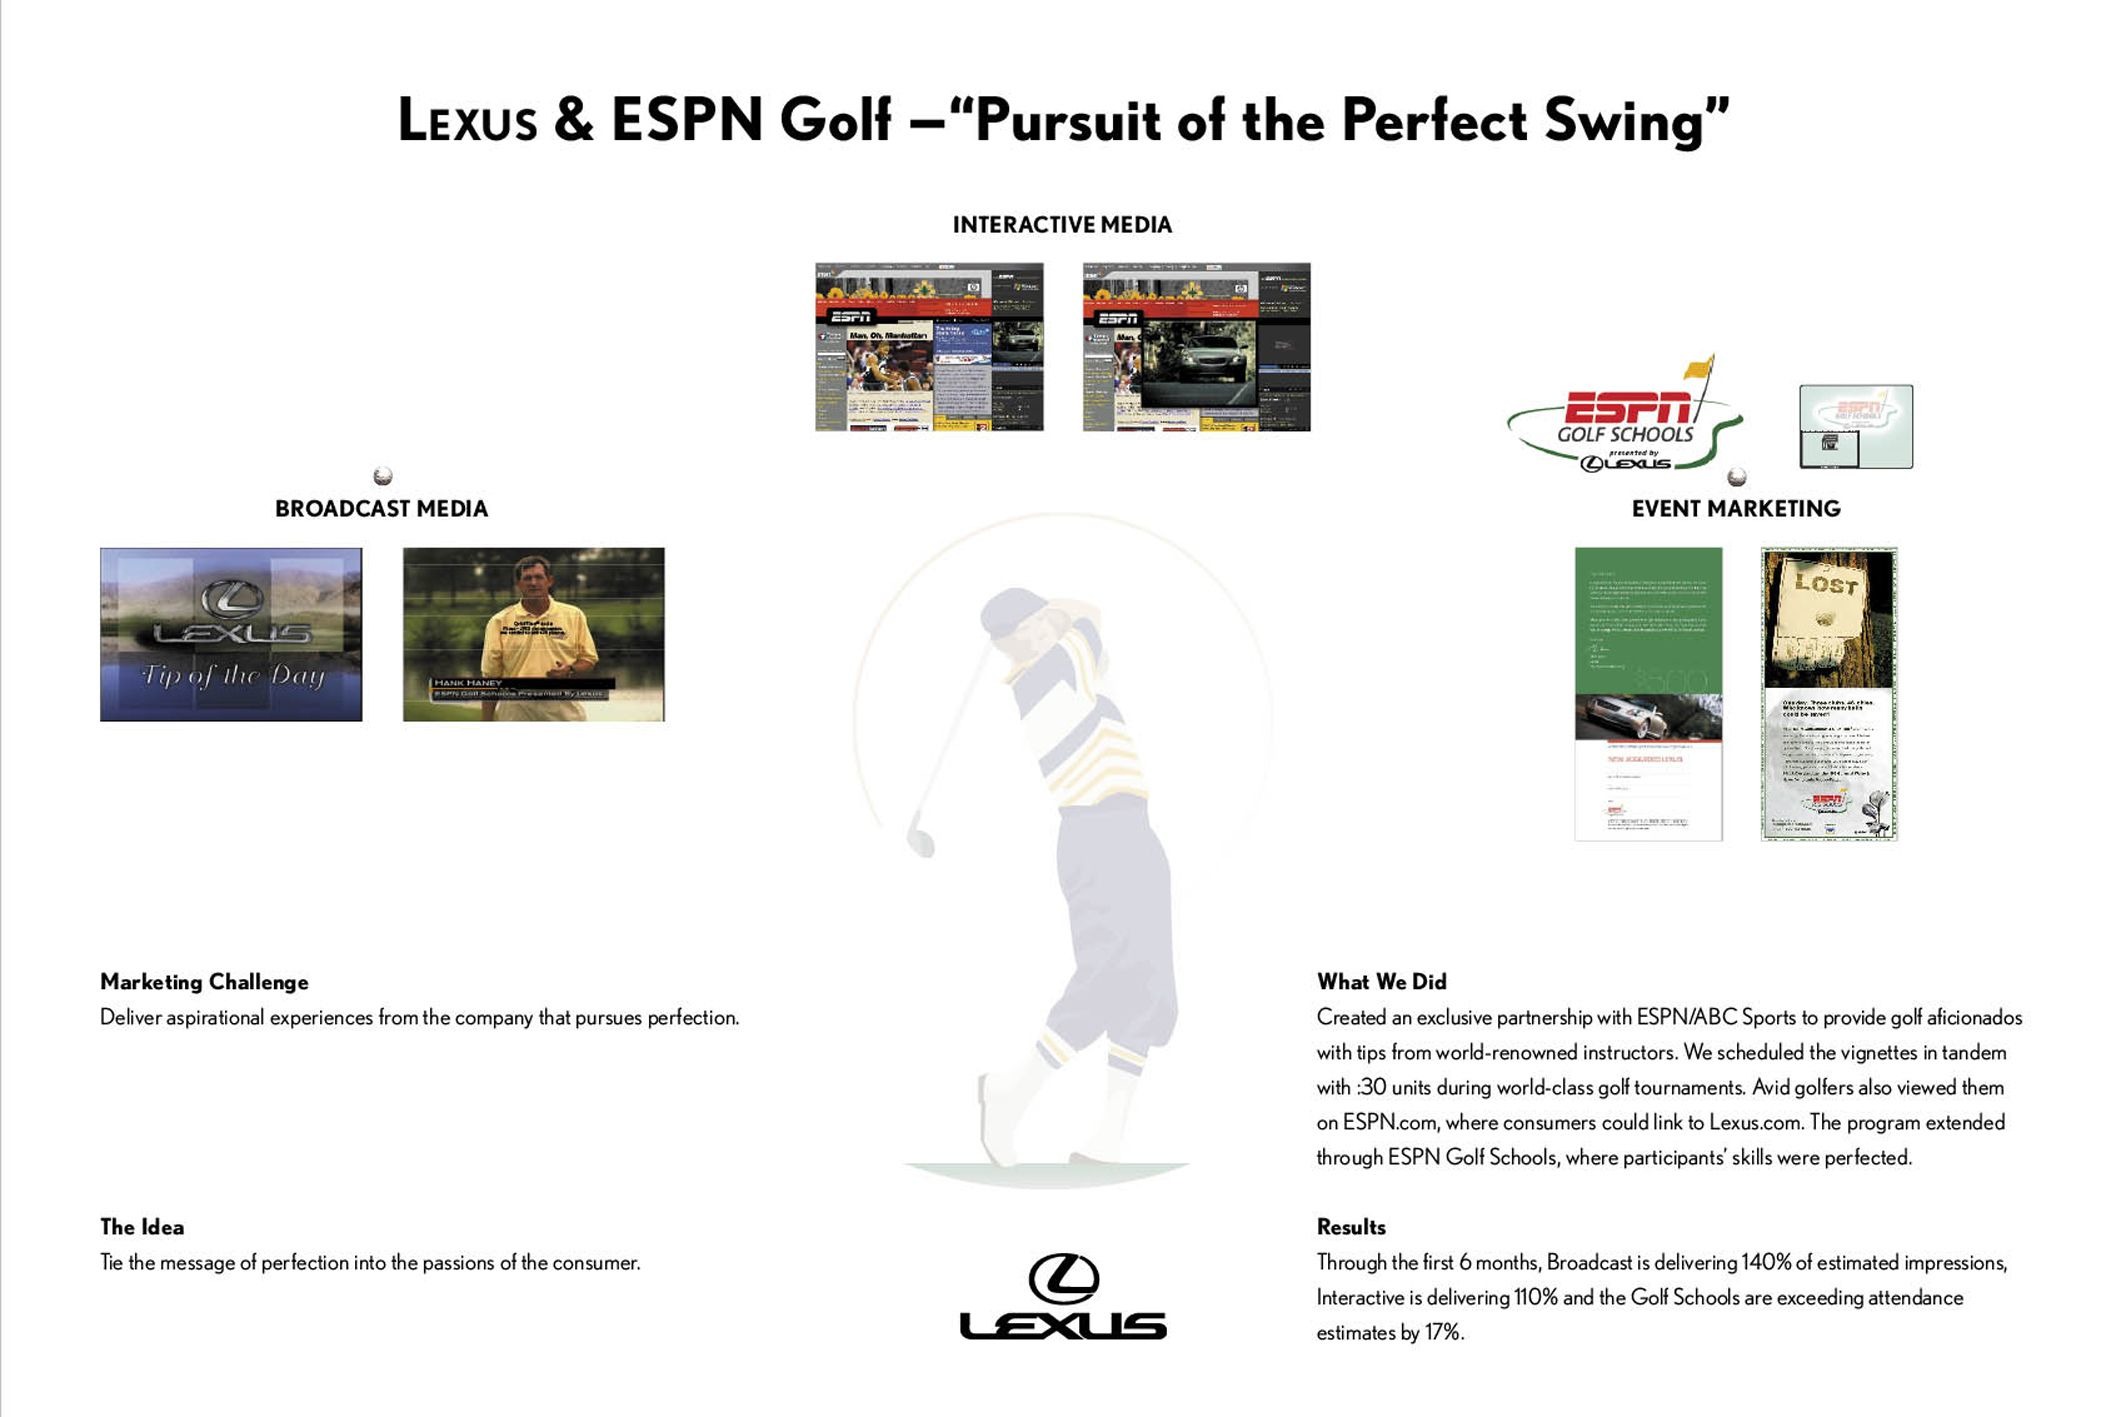 PURSUIT OF THE PERFECT SWING